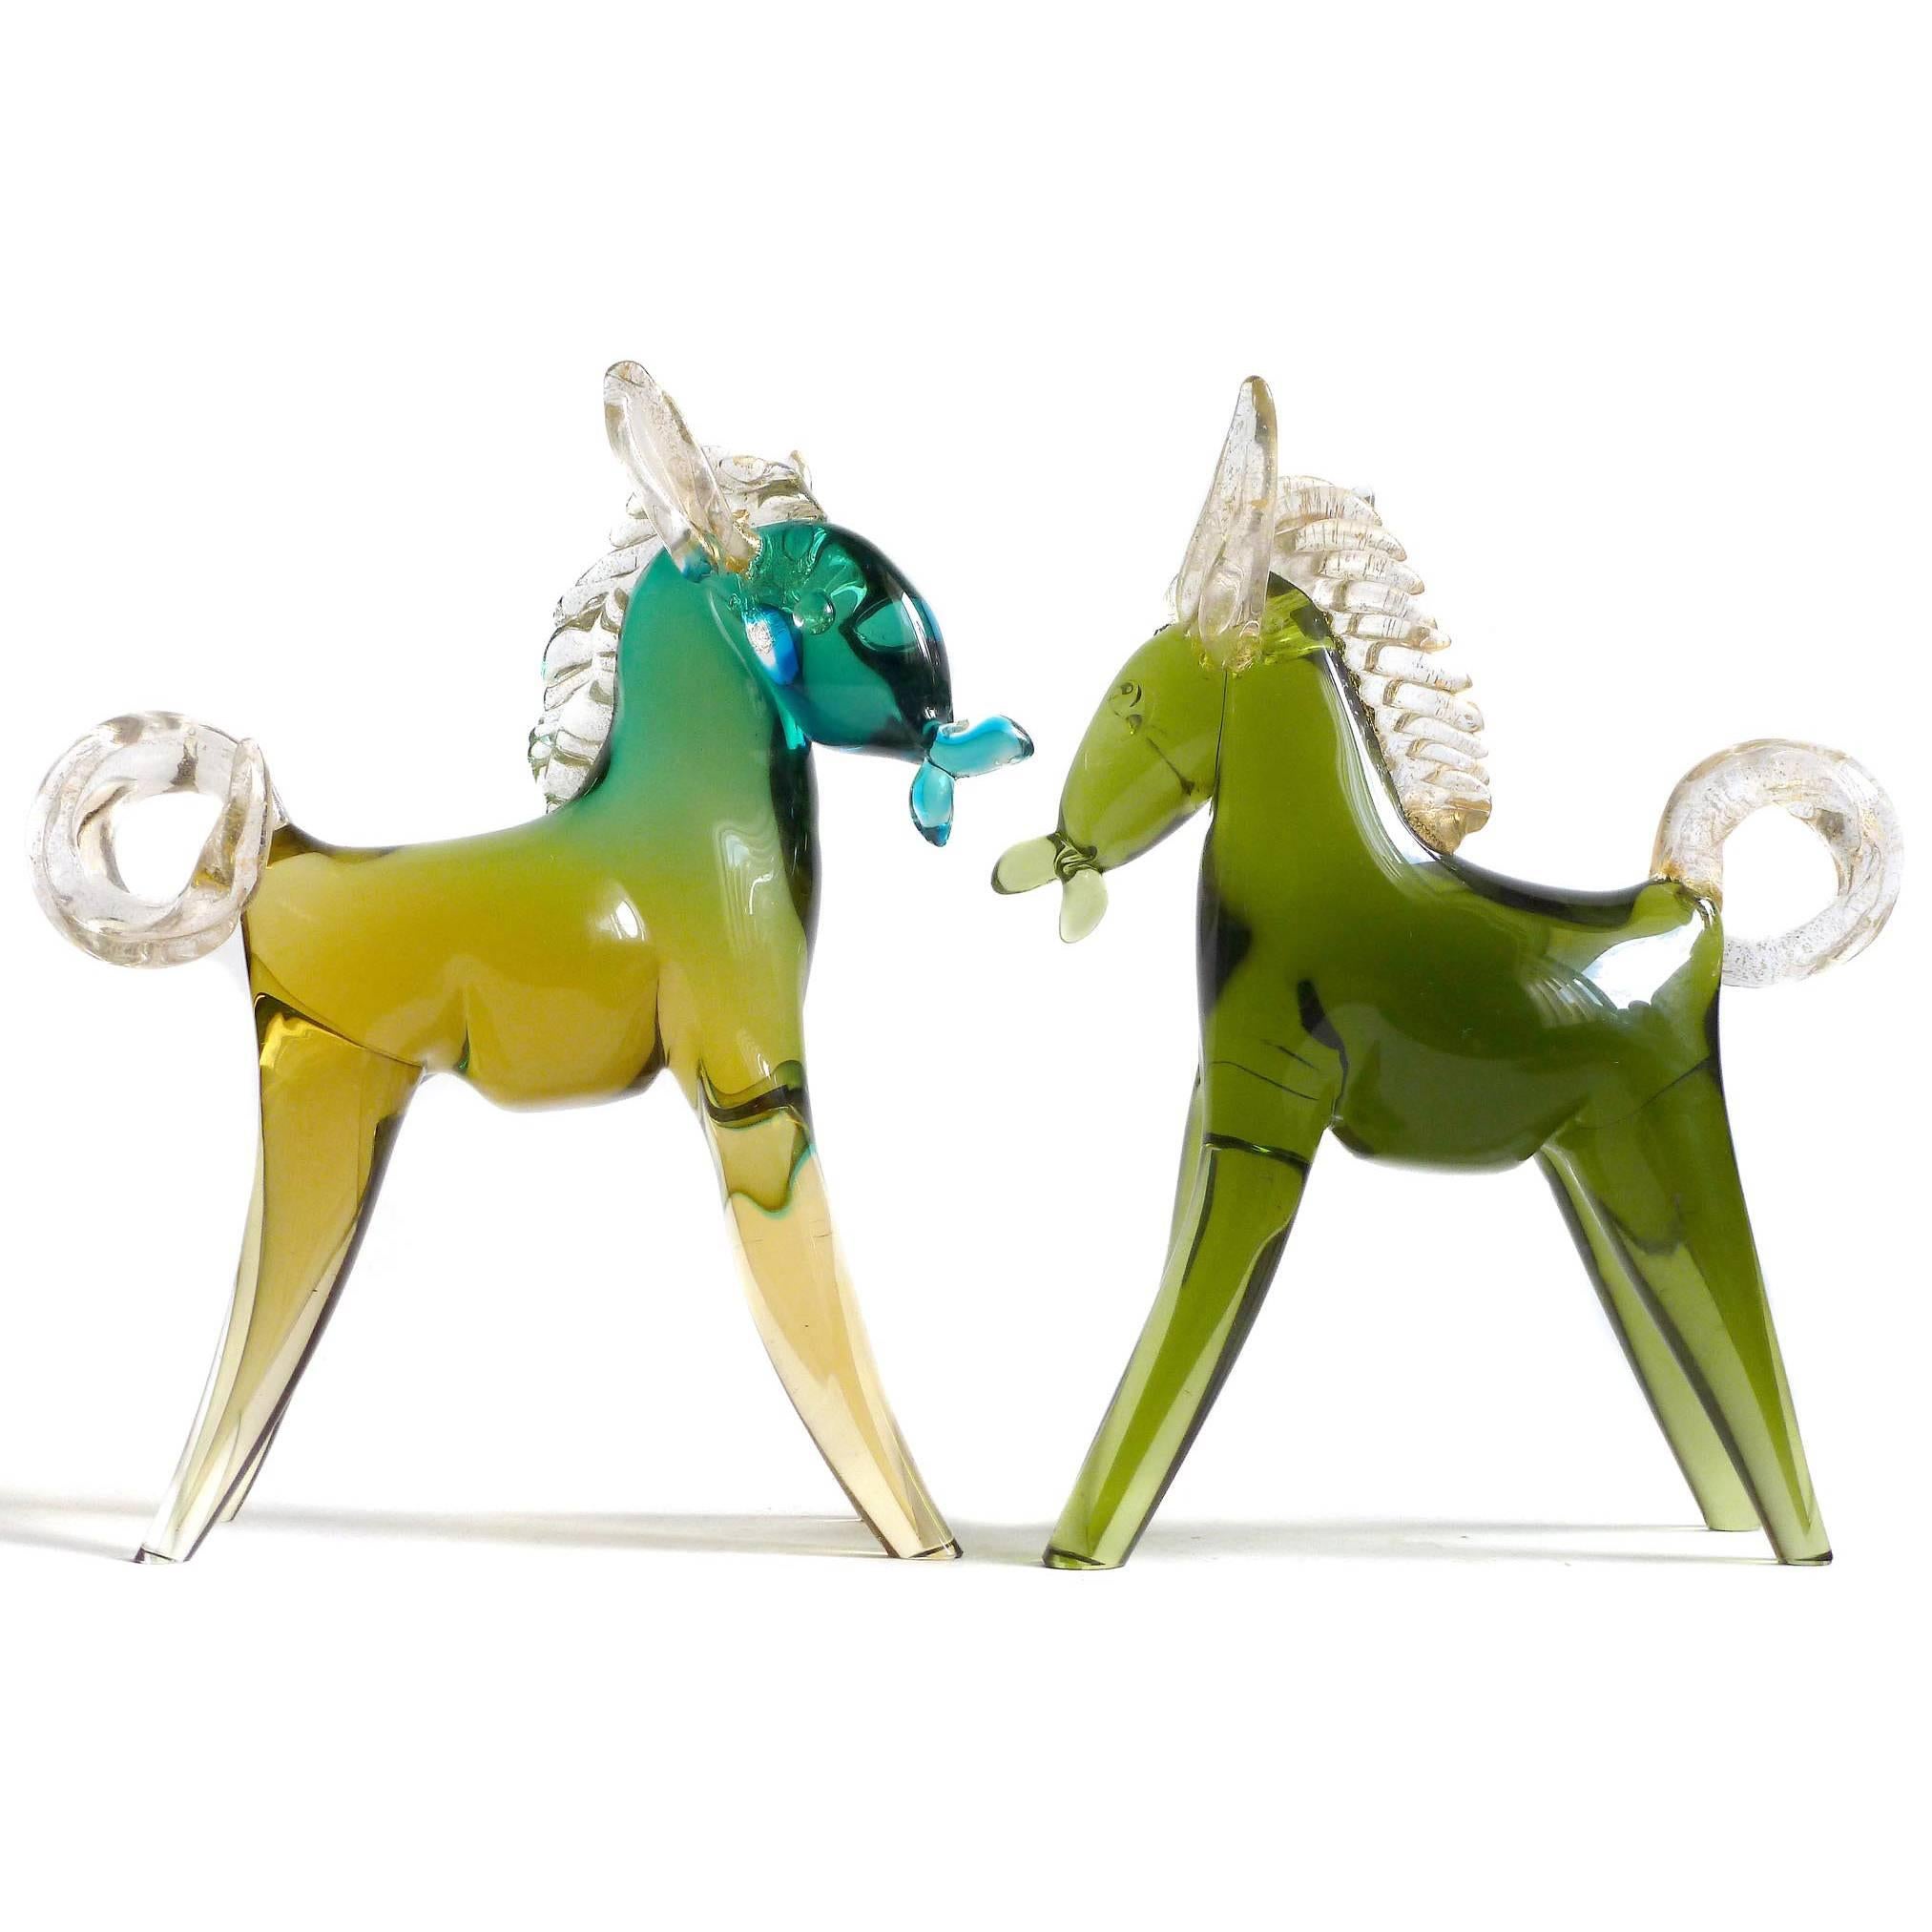 Beautiful and cute set of vintage Murano hand blown Sommerso and gold flecks Italian art glass horses / ponies figurines. Documented to designer Alfredo Barbini, circa 1950-1960s. Sold as a set on this listing, but can be sold individually if